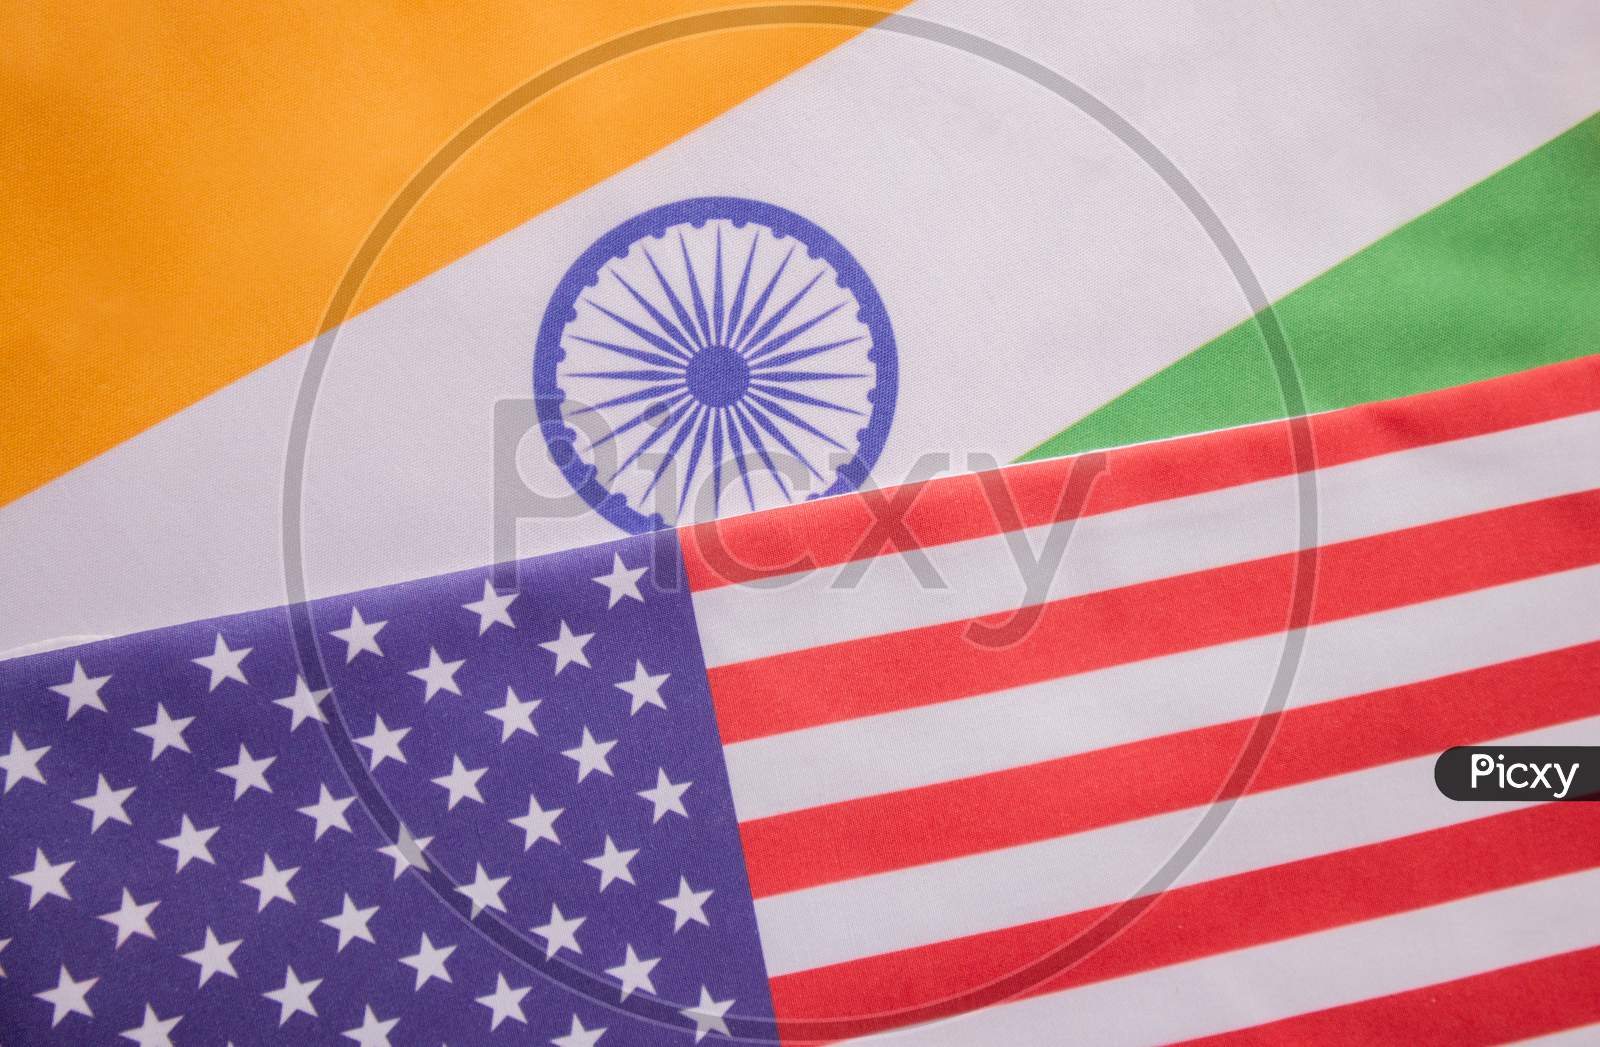 Concept Of Bilateral Relationship Between Two Countries Showing With Two Flags: United States Of America And India.